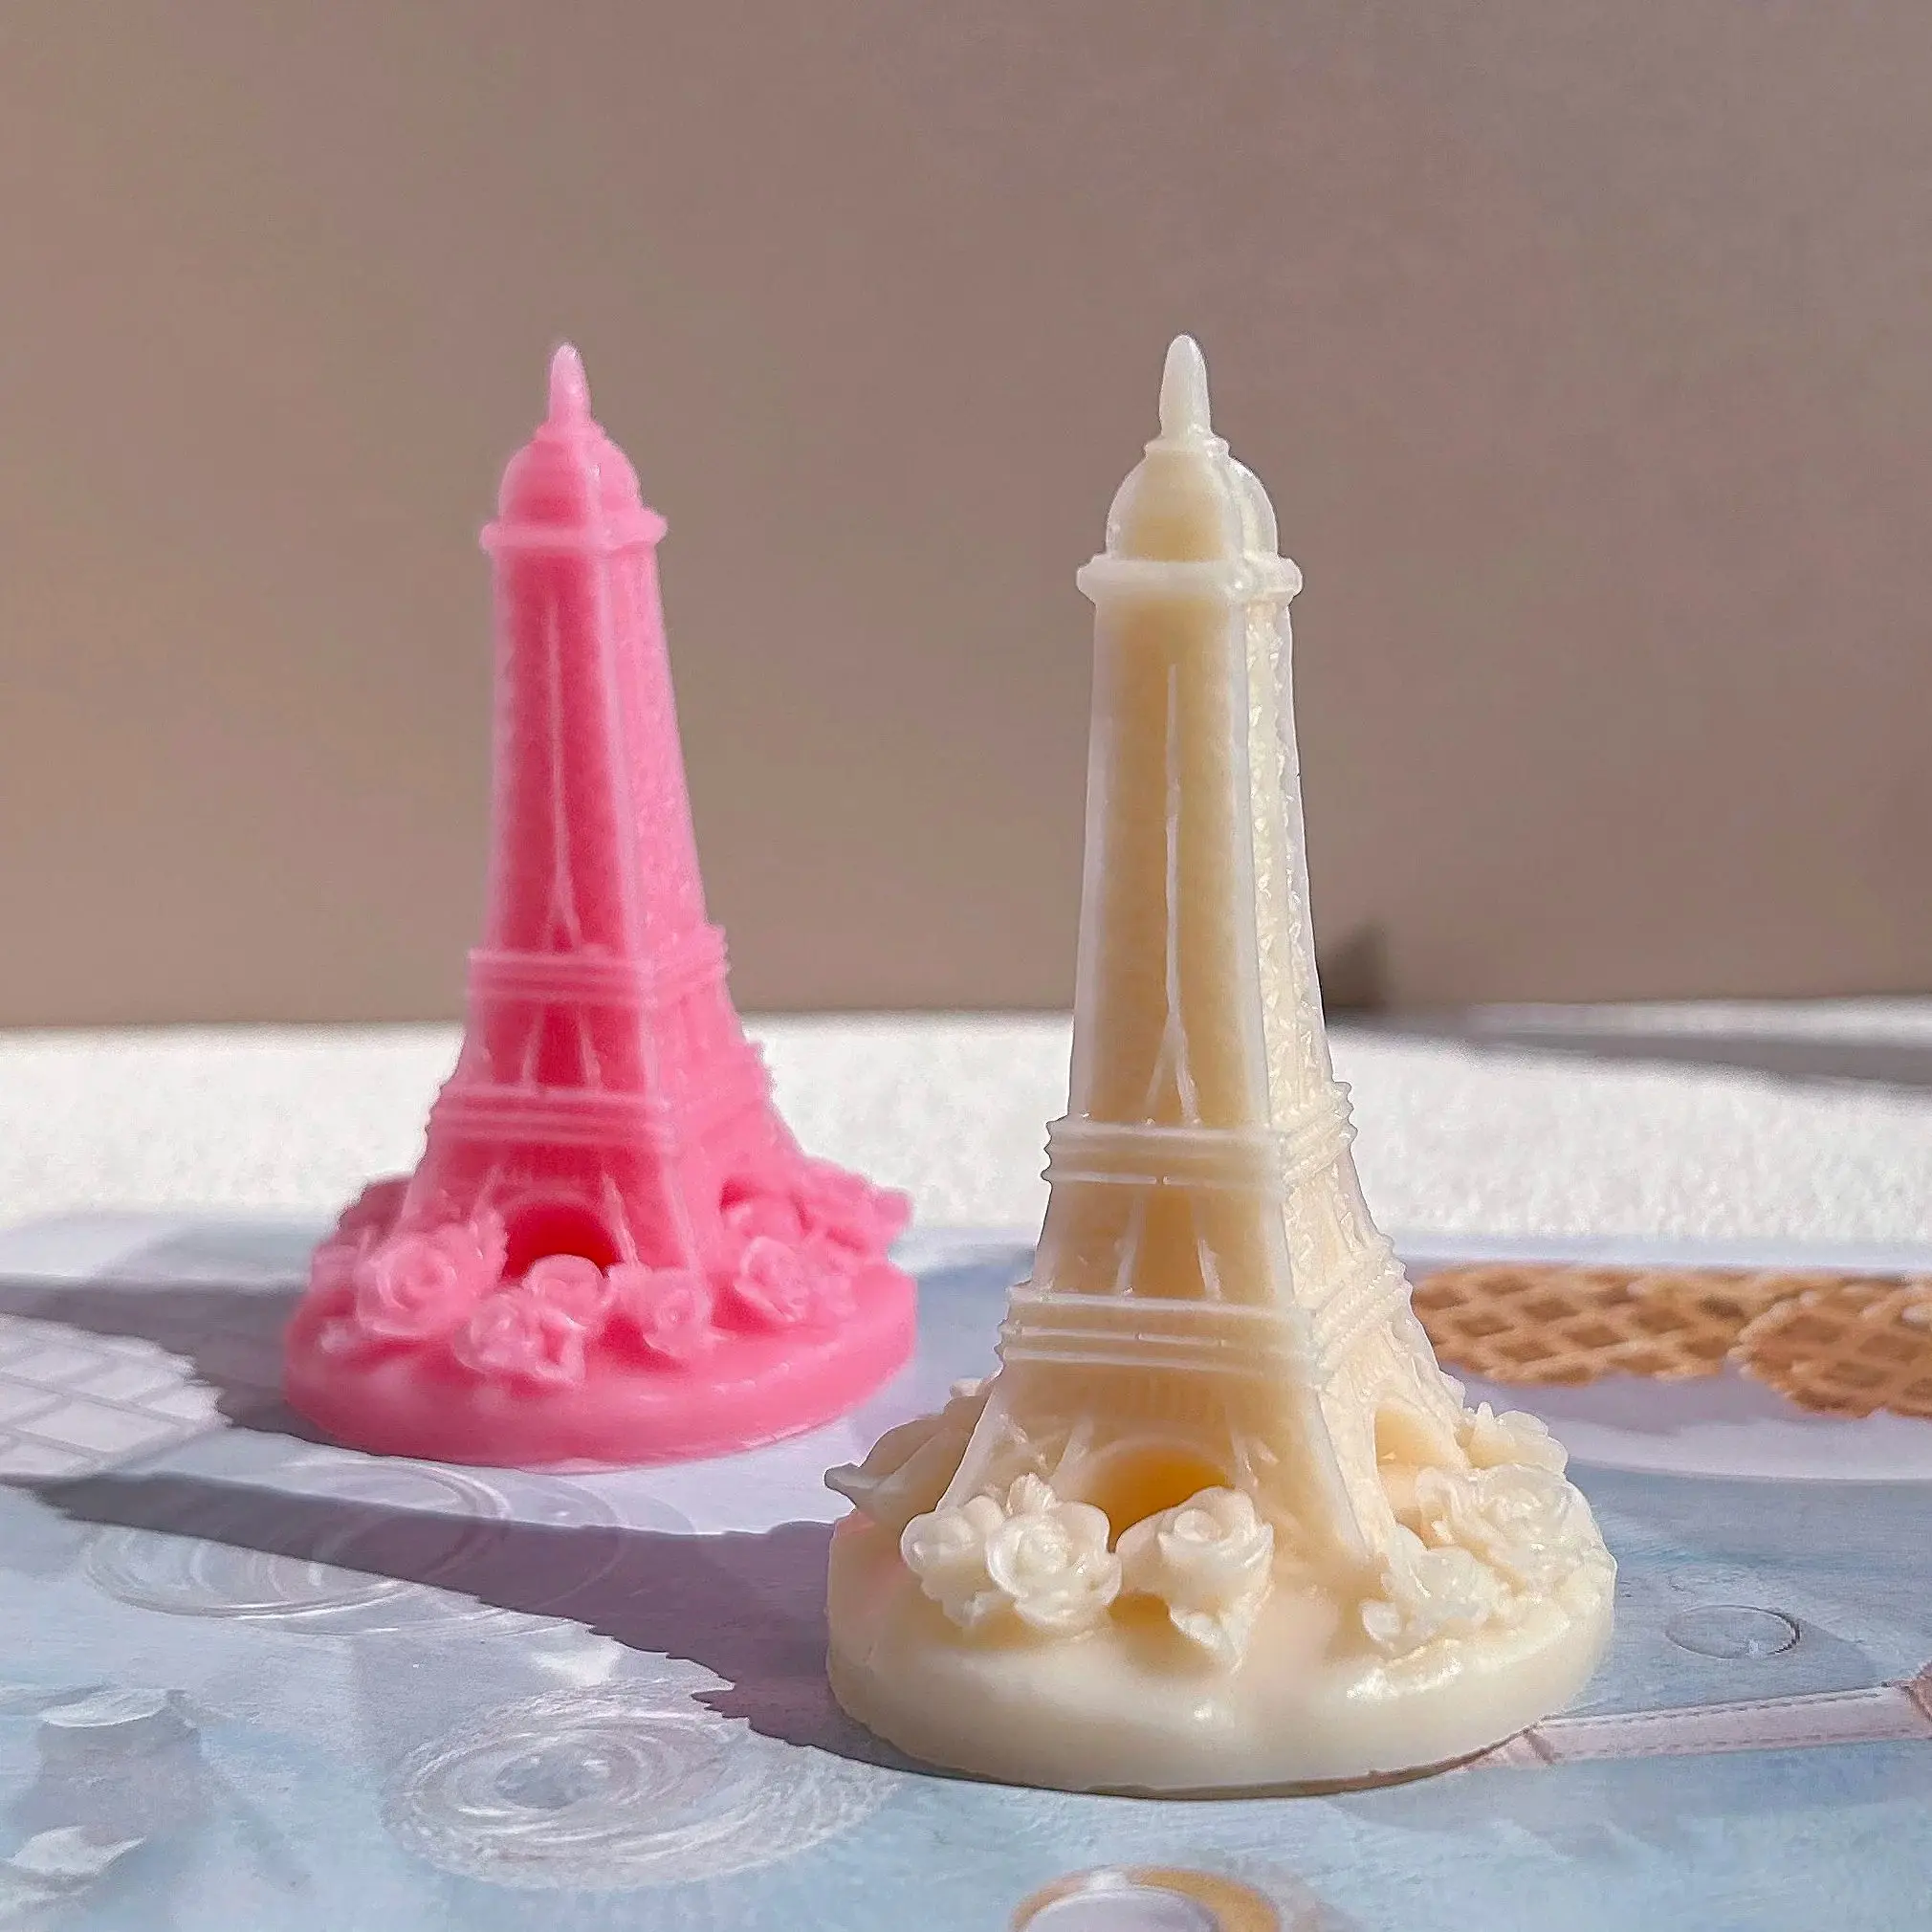 

2023 New Eiffel Tower Silicone Candle Mold Art Paris Tower Statue Gypsum Resin Silicone Mold Home Decoration Festival Gifts